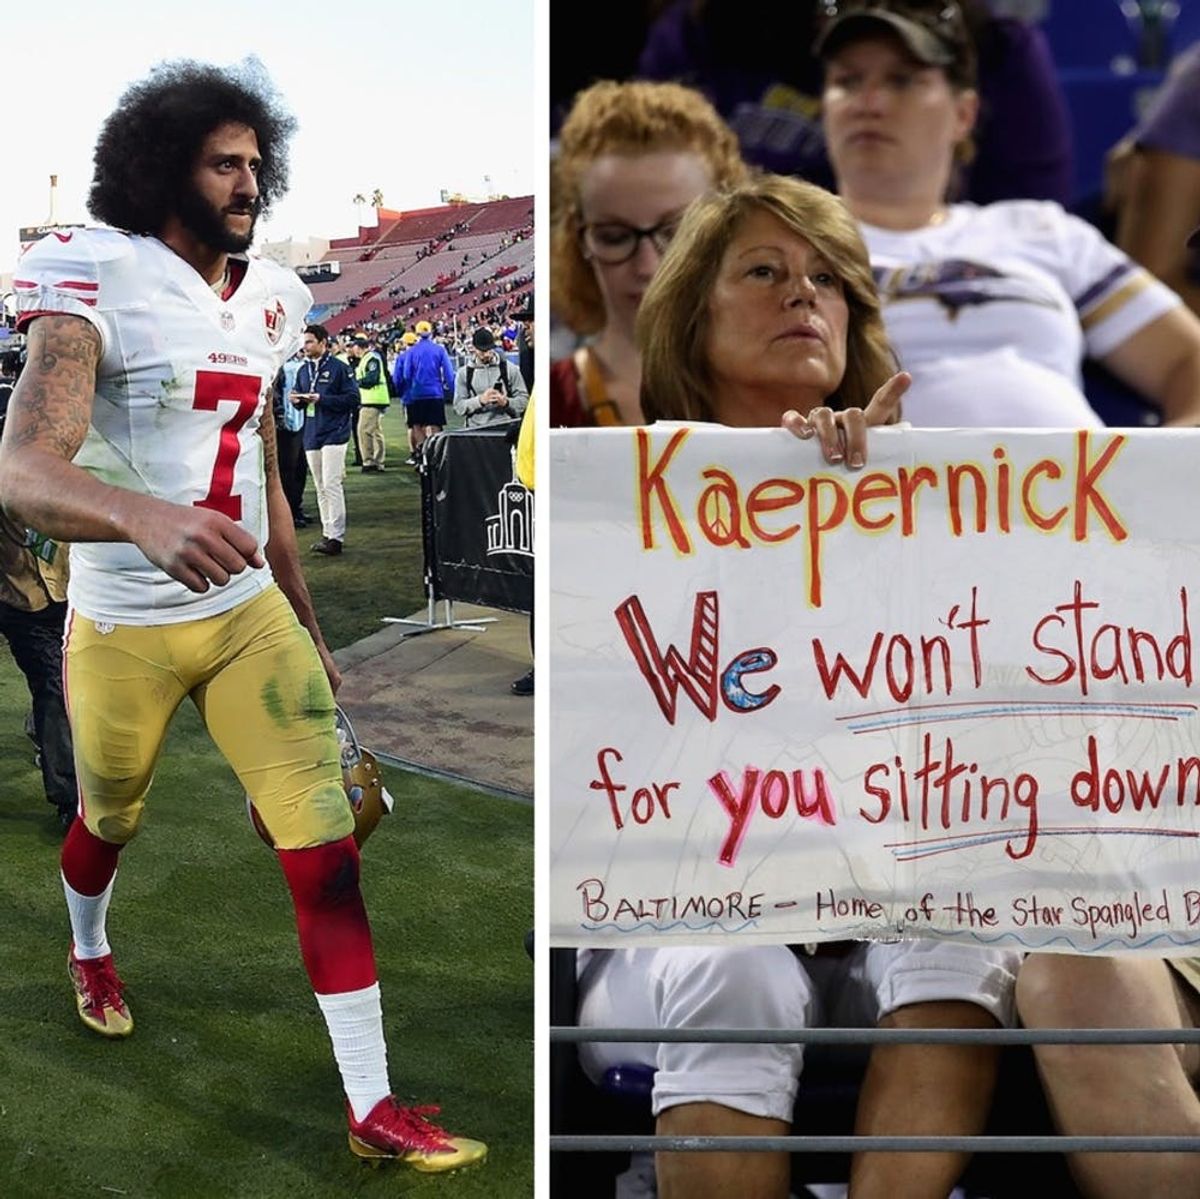 How #TakeTheKnee Turned an Athletes’ Movement into a National Debate